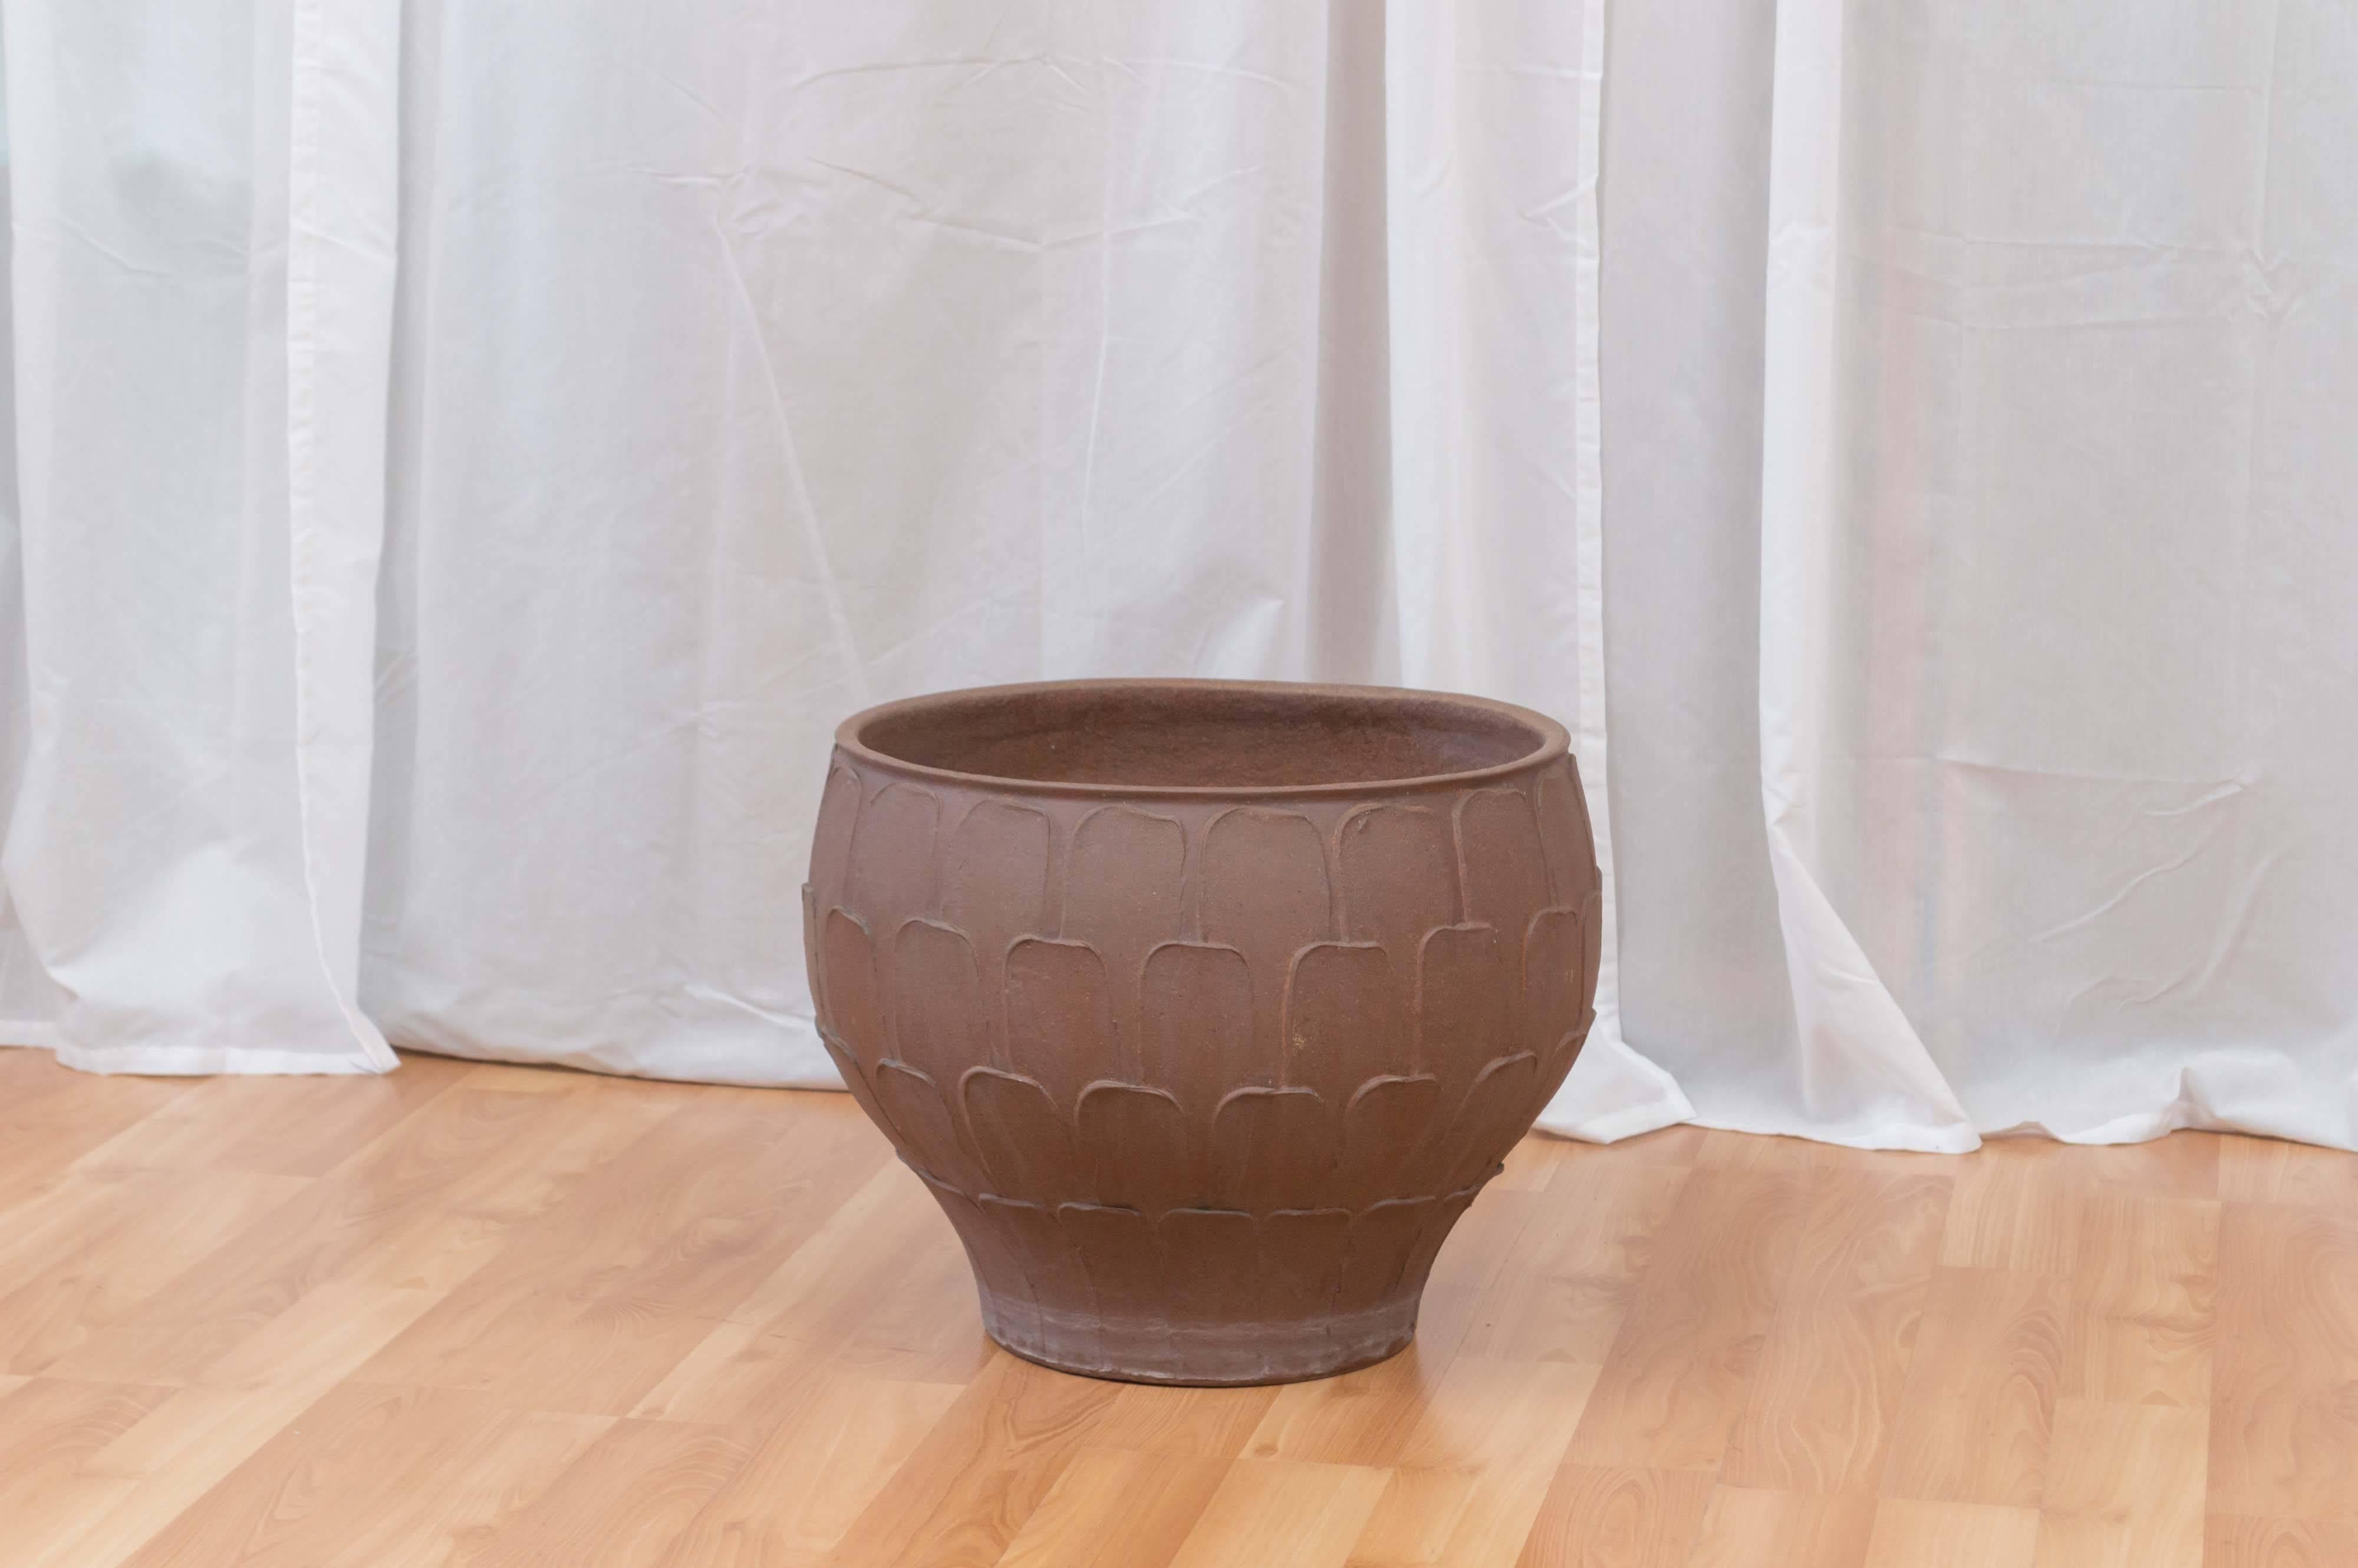 A Classic California Modern planter, circa 1960s by David Cressey for Architectural Pottery. This design is known by dealers and collectors as 